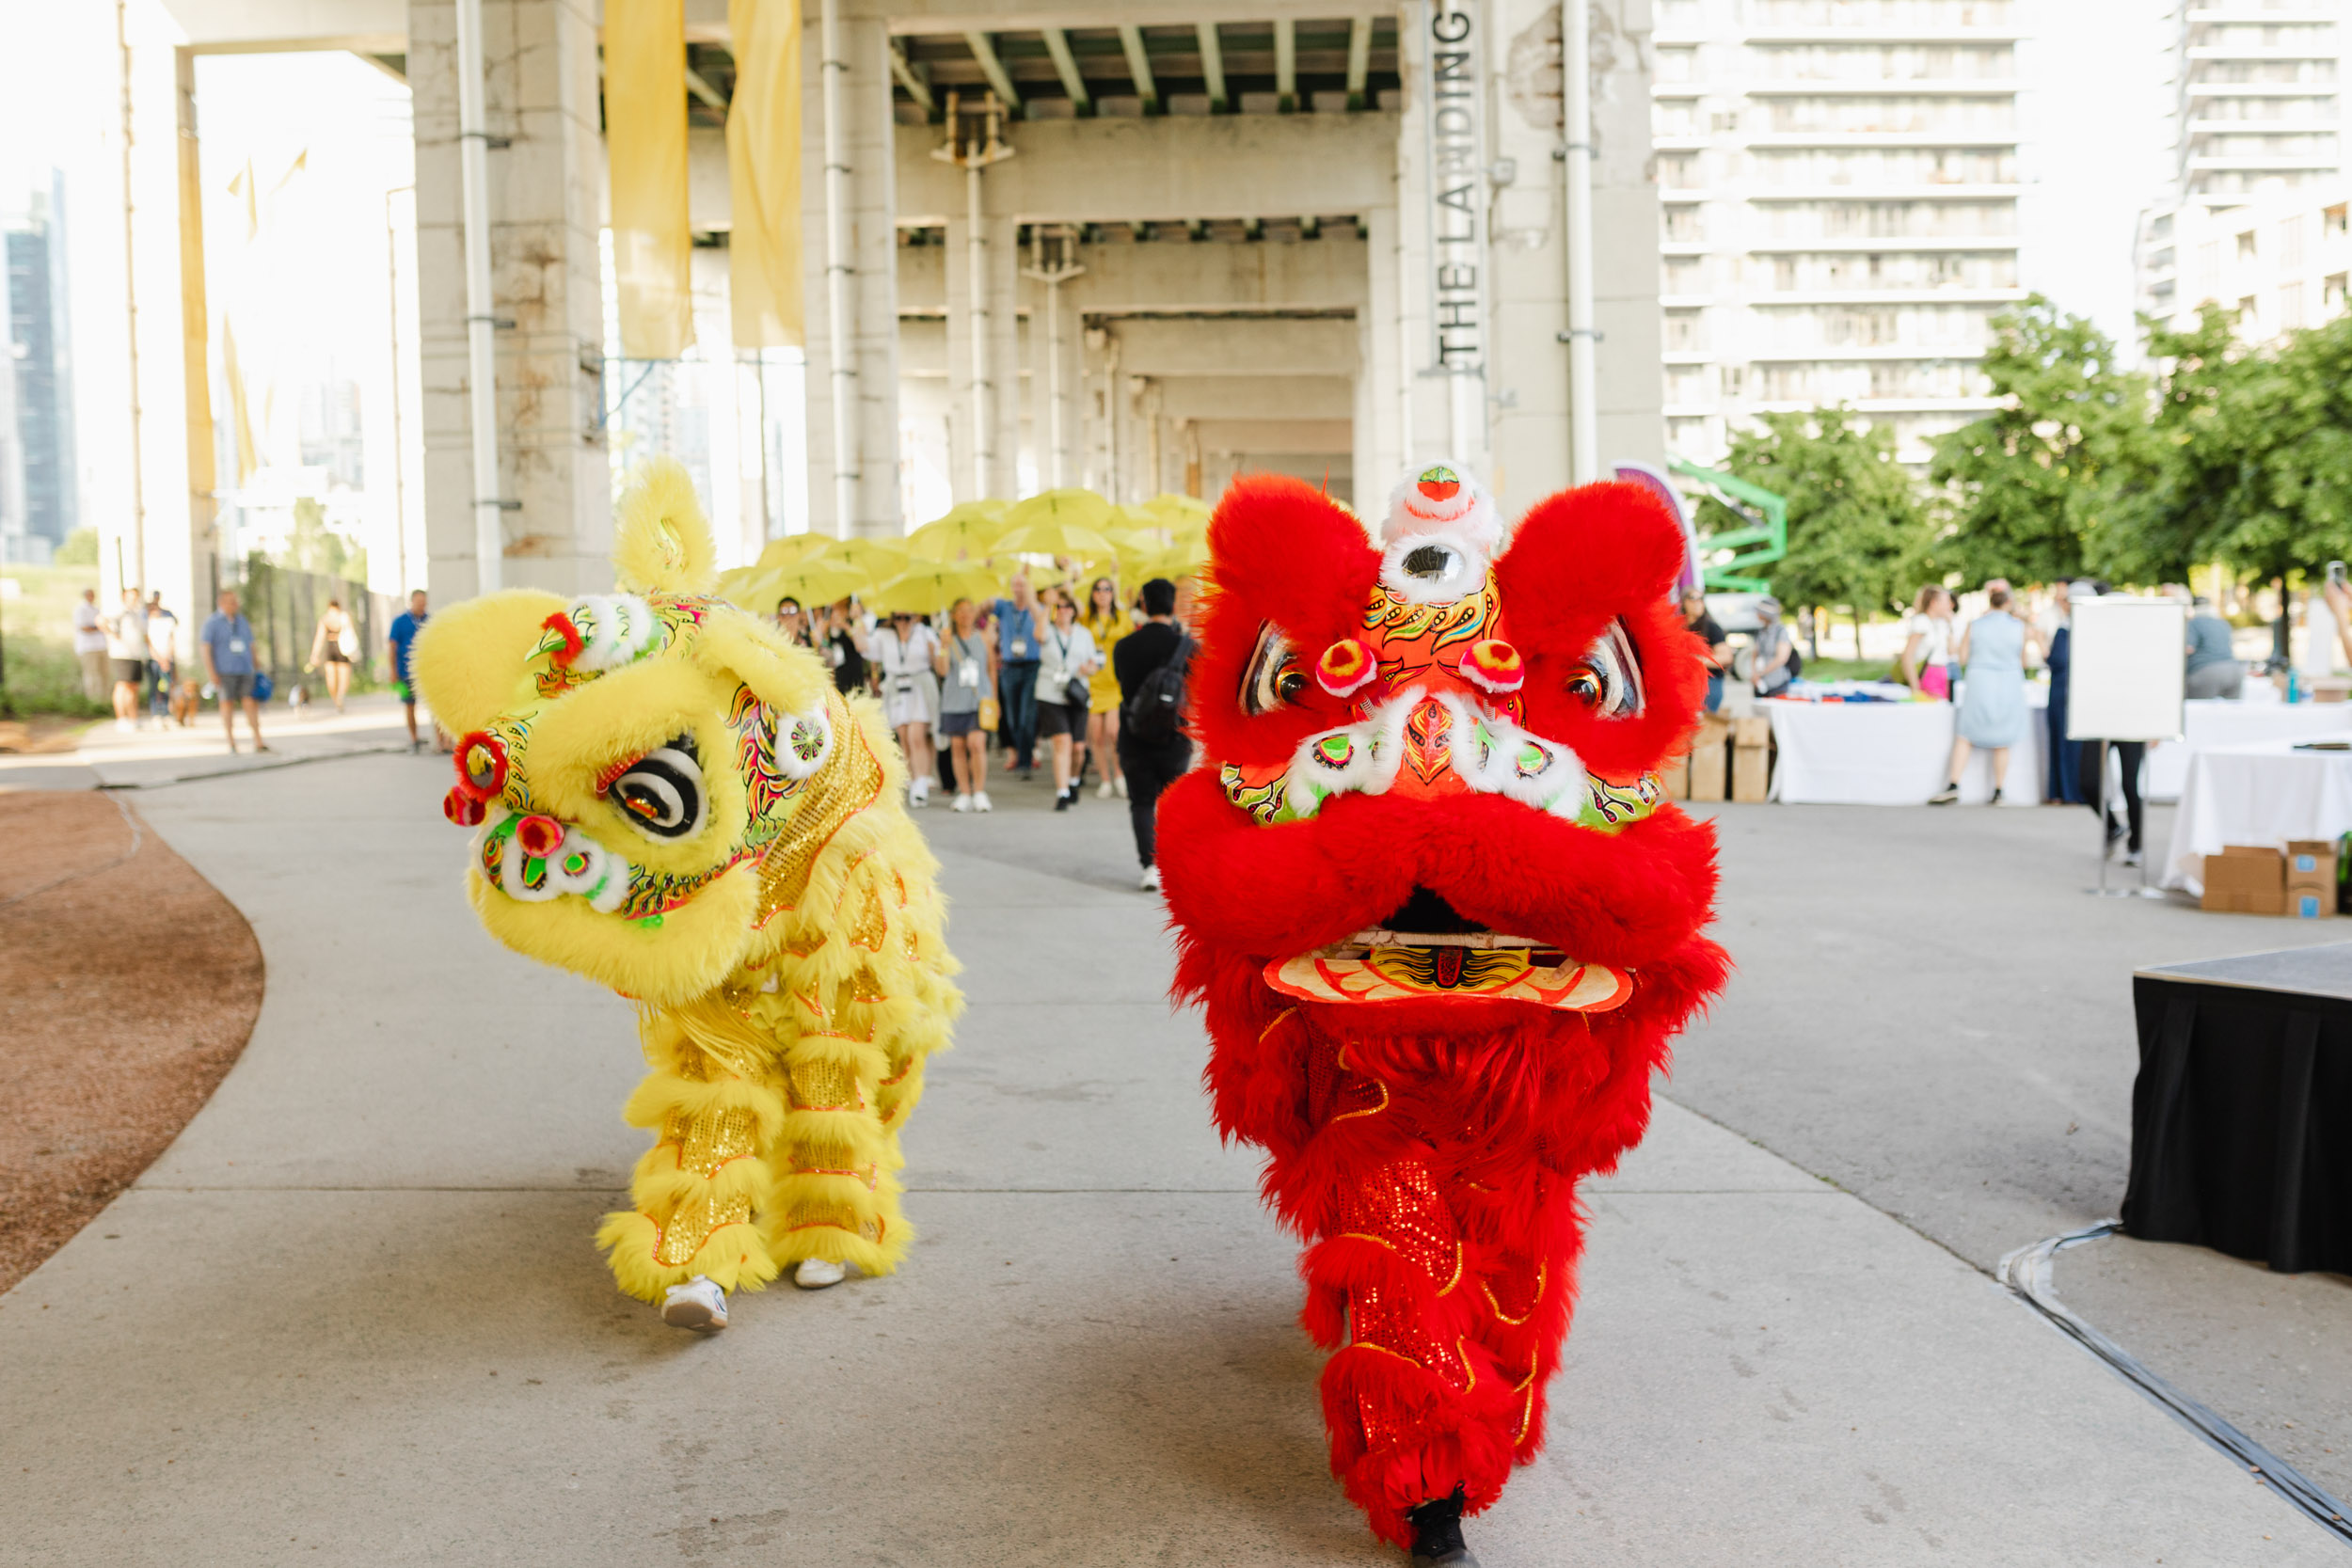 Two Chinese lions parading on a sidewalk during a conference.